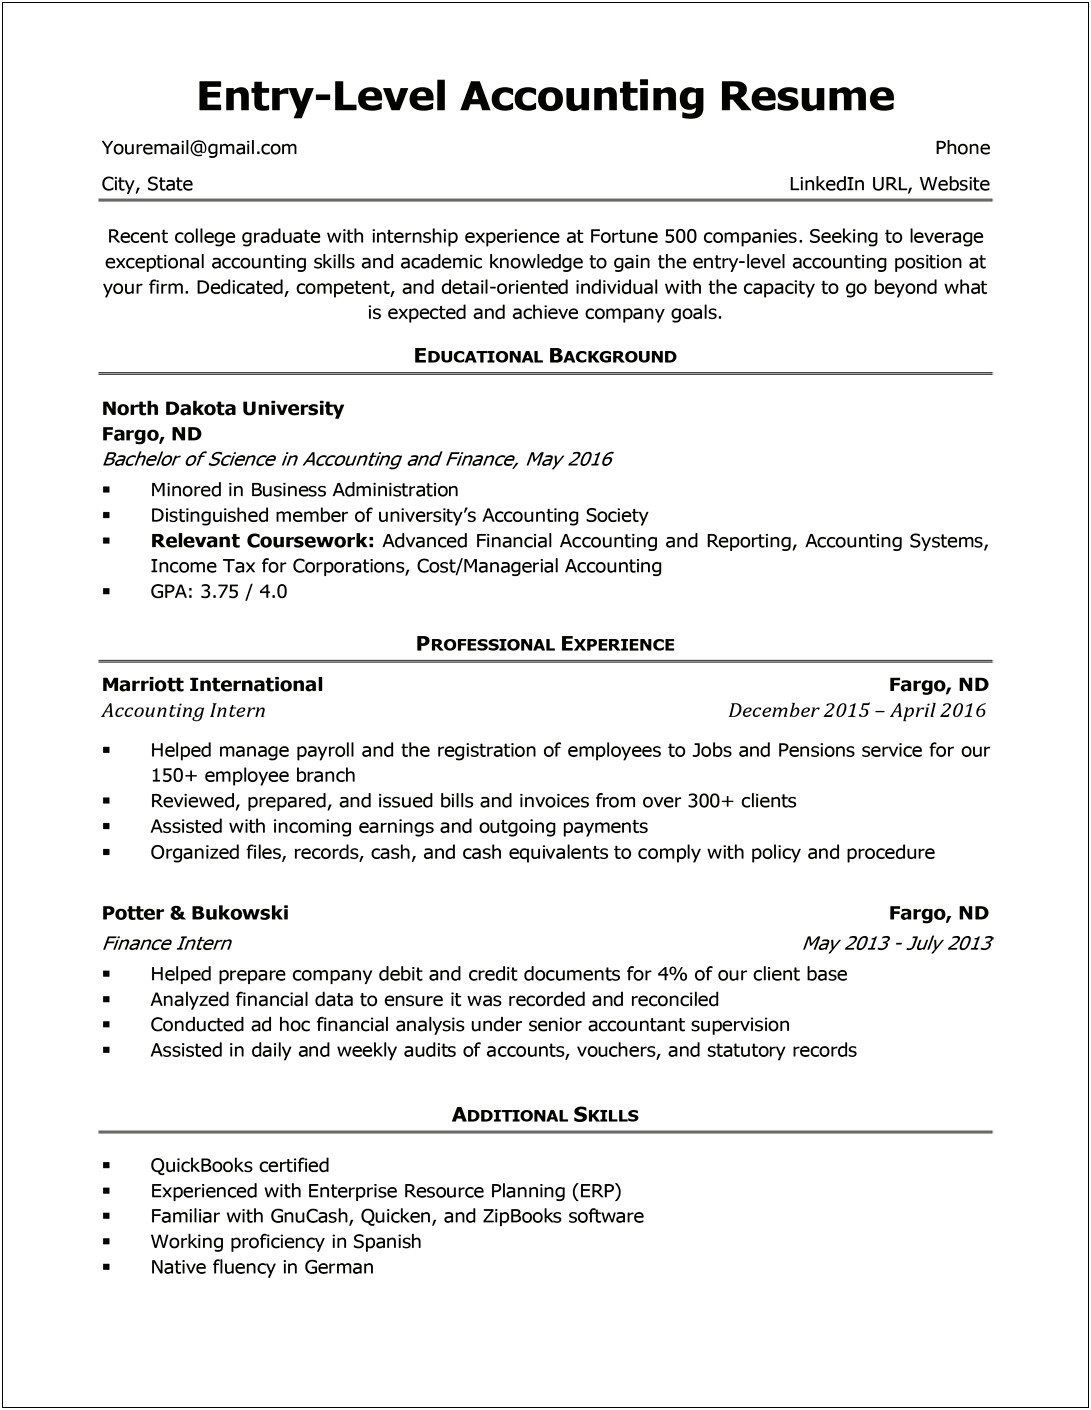 Higher Education Administration Resume Objective